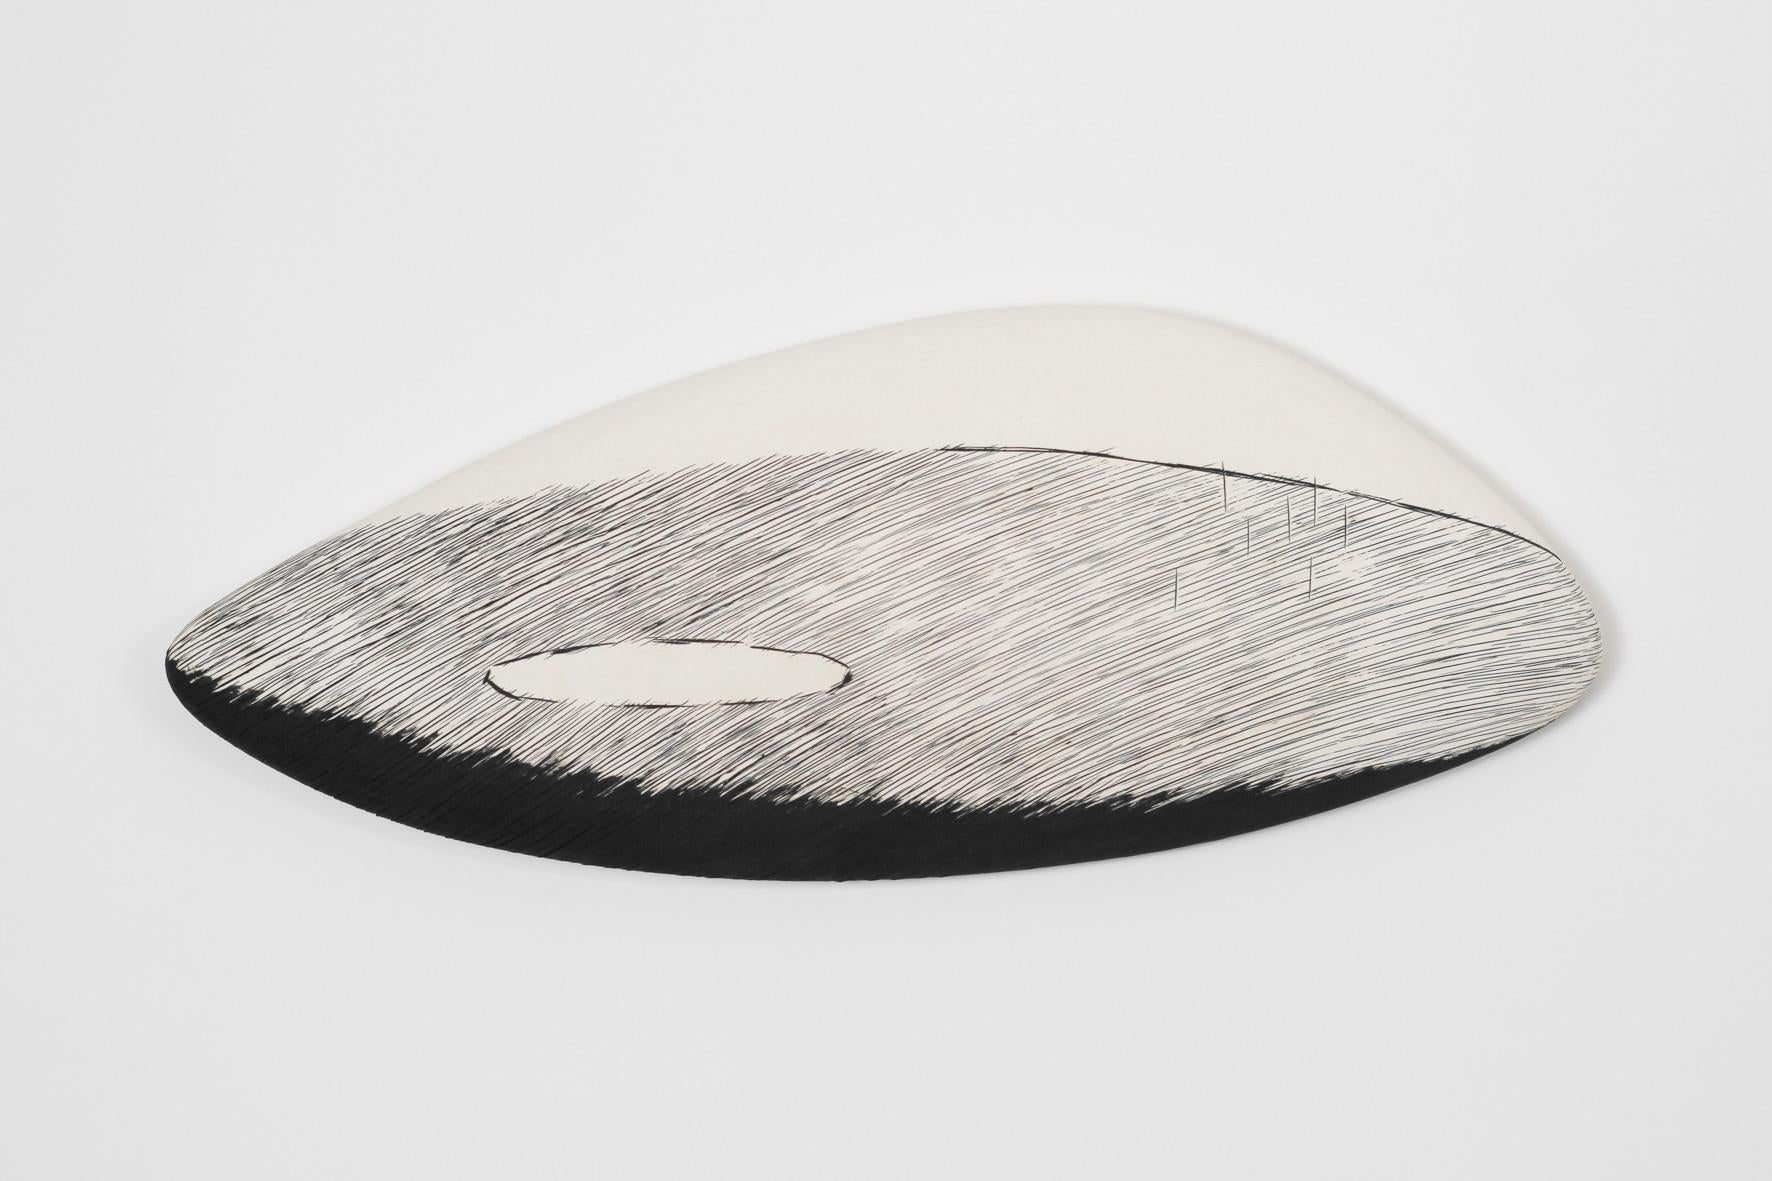 Original artwork by Robyn Campbell.
Ascent 5, wall mounted ceramic, 17cm x 41cm x 4cm (d), 2024
Simplicity, line, material, surface, and form are the focus of Robyn Campbell’s art practice. In this exhibition she uses various mediums, along with